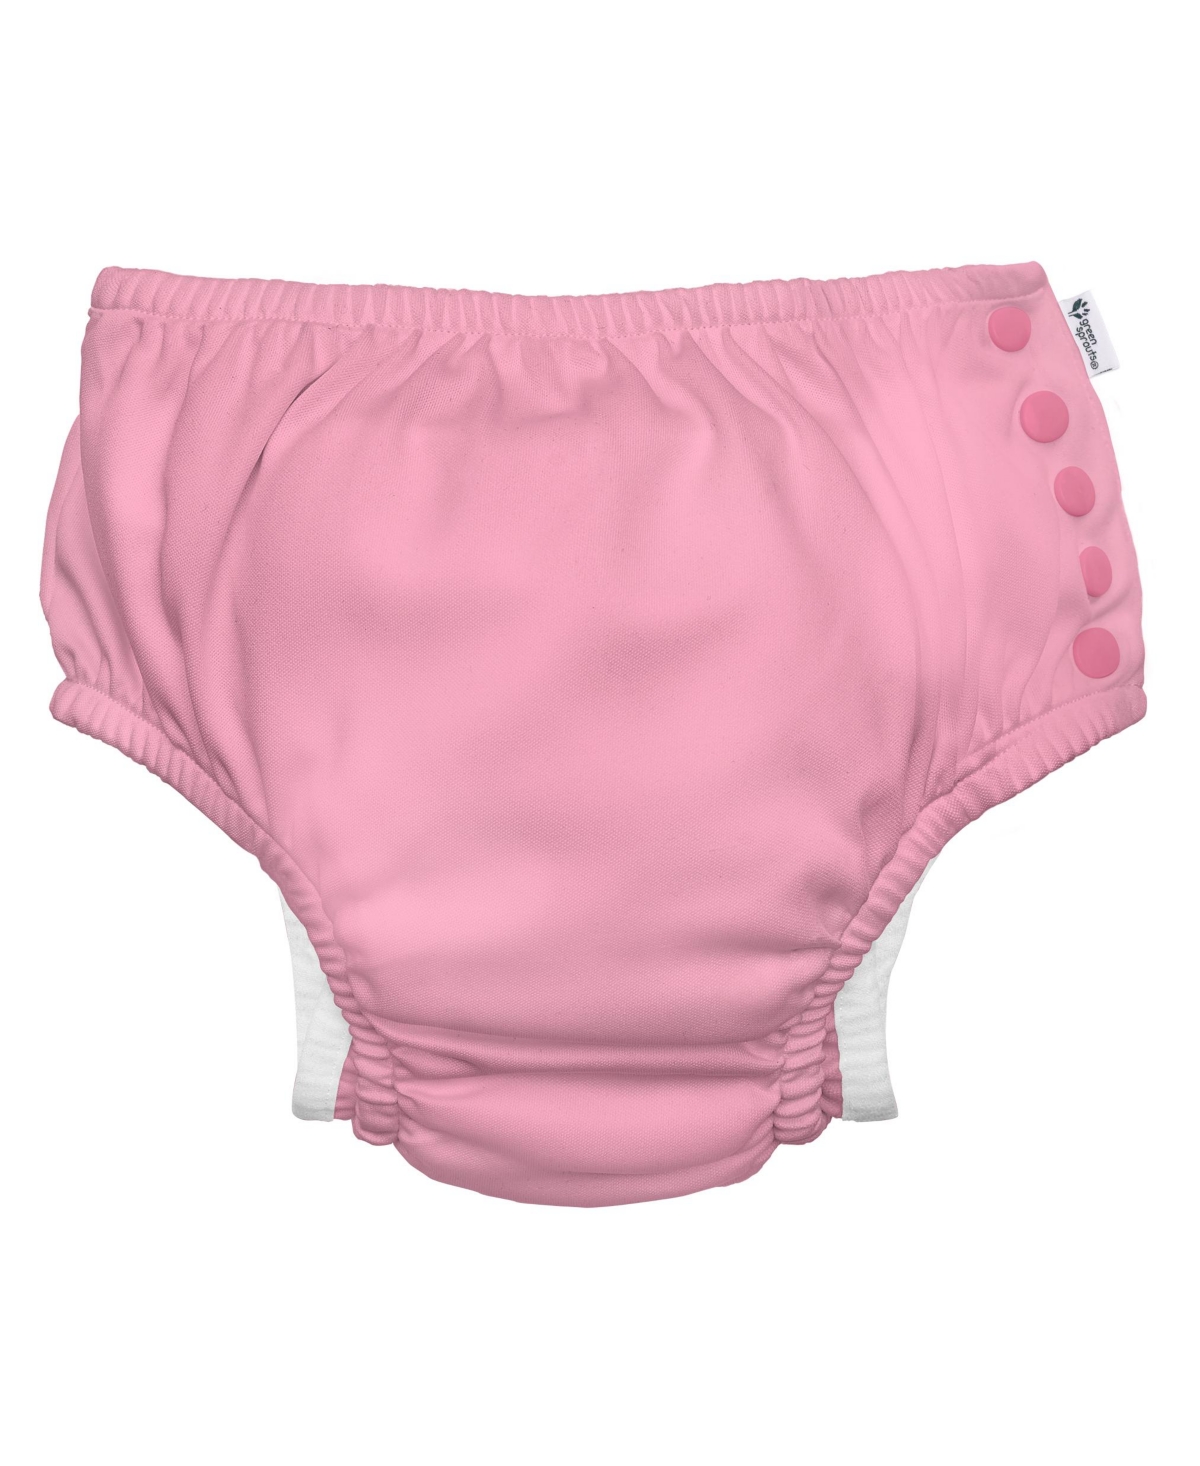 Green Sprouts Baby Girls Snap Swim Diaper In Hot Pink